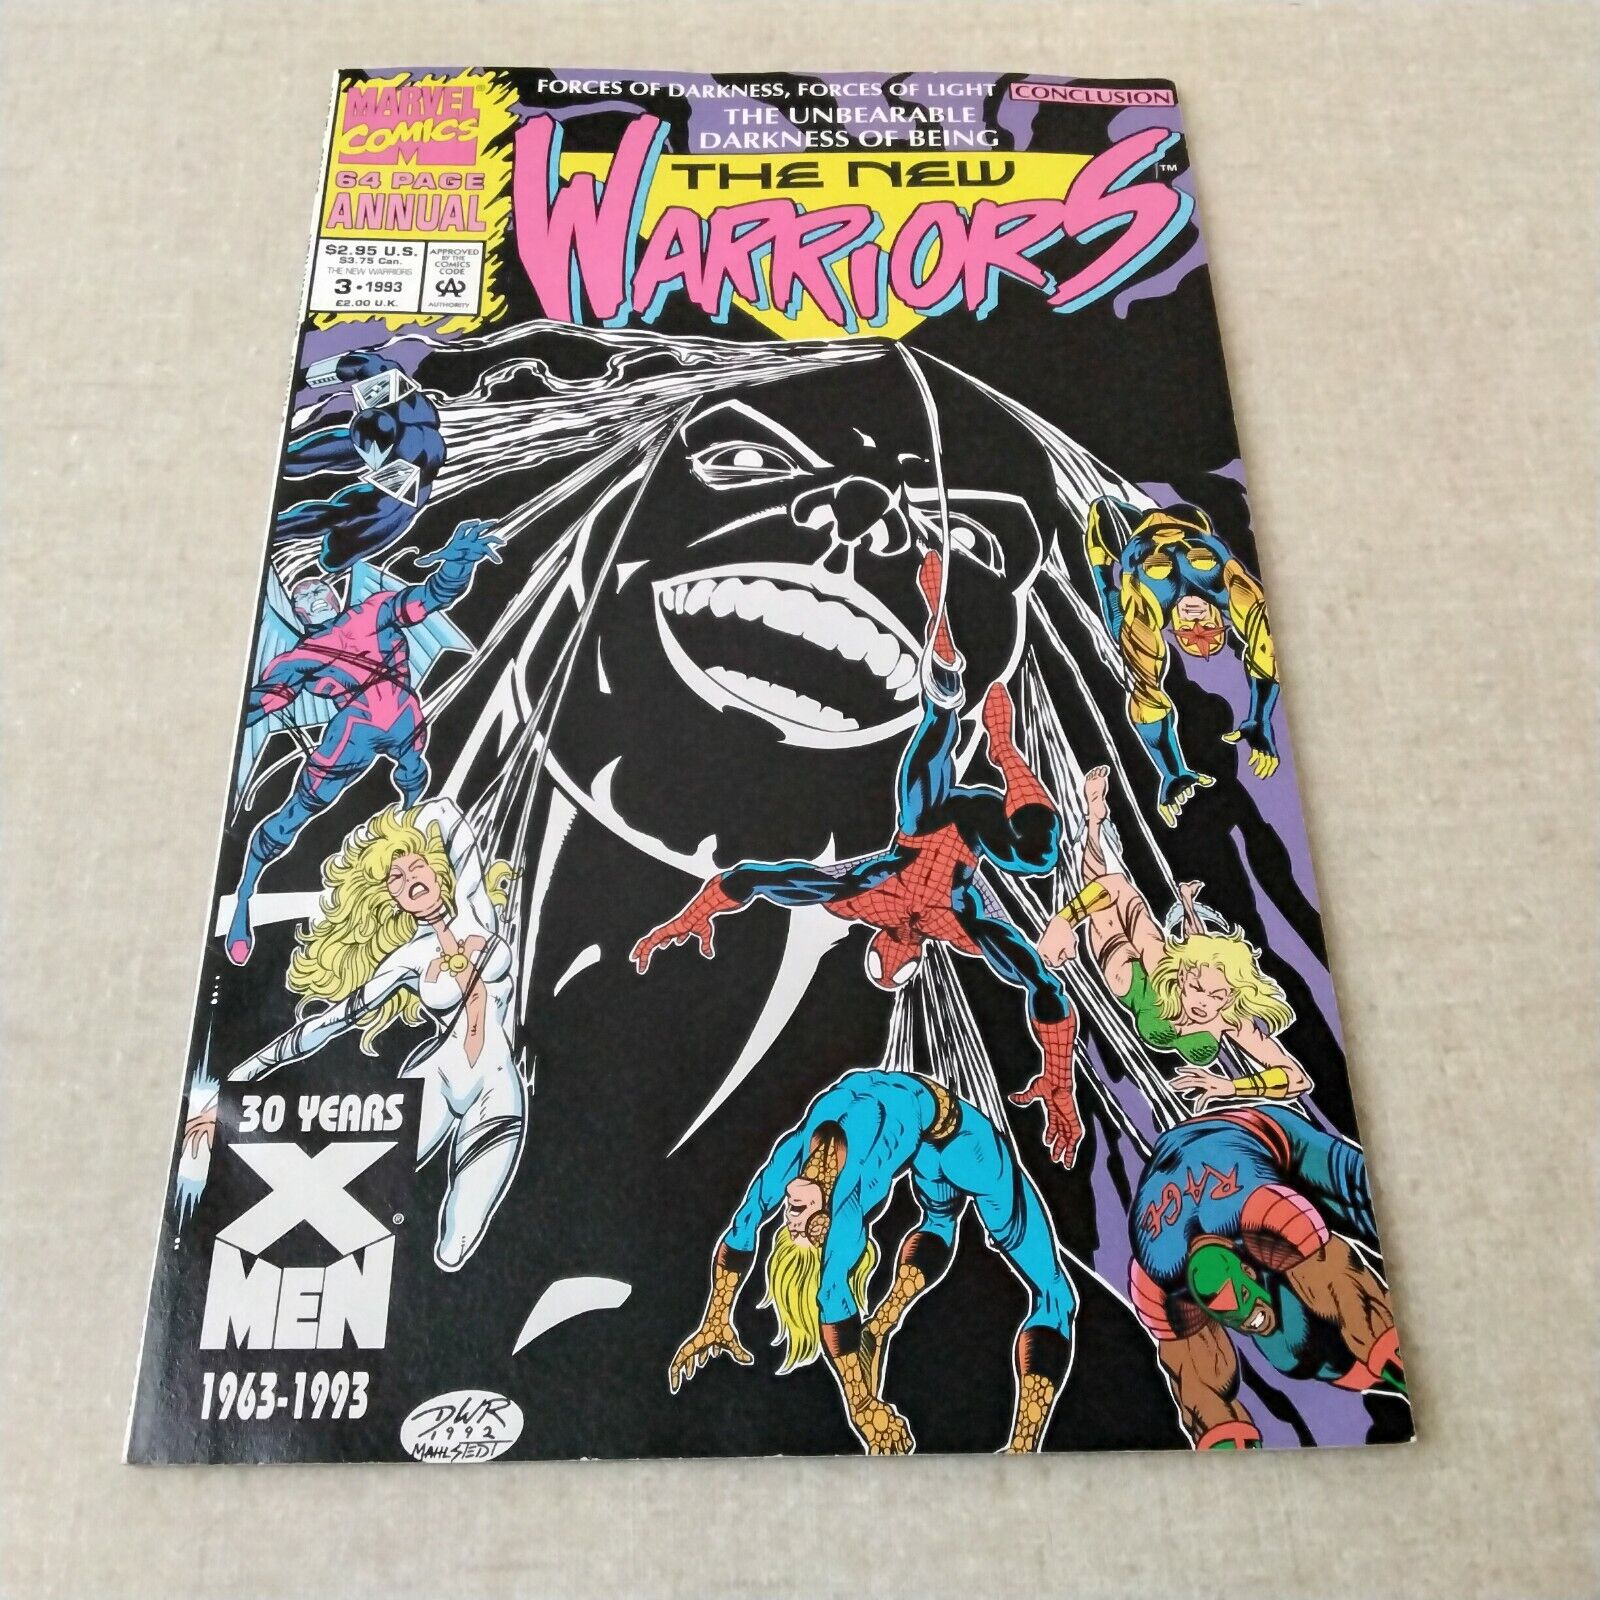 Marvel Comics The New Warriors 64 Page Annual 1993 Comic Book